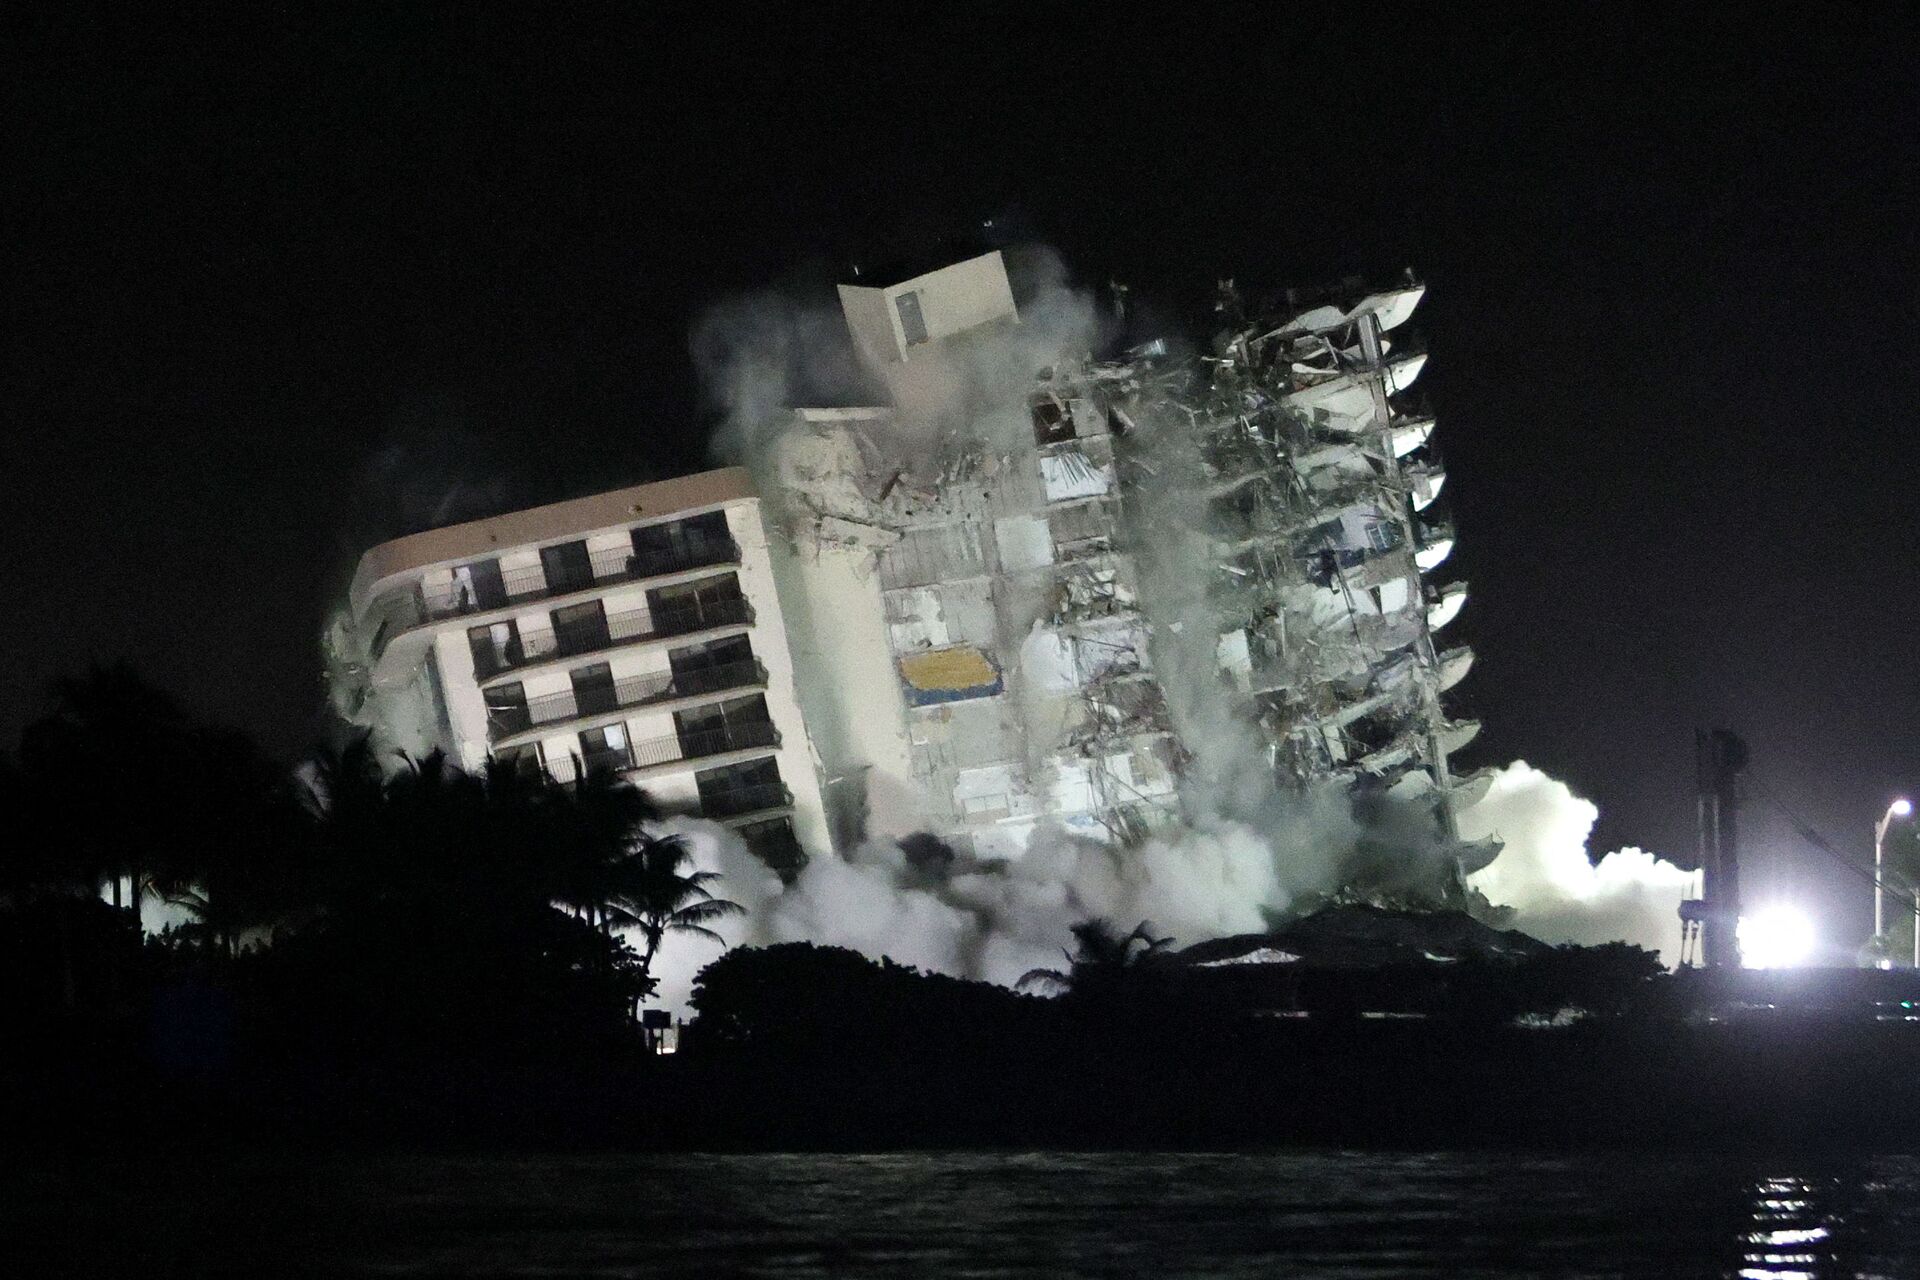 The remaining part of the partially collapsed 12-story Champlain Towers South condo building falls with a controlled demolition on July 4, 2021 in Surfside, Florida. The decision by officials to bring the rest of the building down was brought on by the approach of Tropical Storm Elsa and fears that the structure might come down in an uncontrolled fashion. Over one hundred people are missing as the search-and-rescue effort continues. - Sputnik International, 1920, 07.09.2021